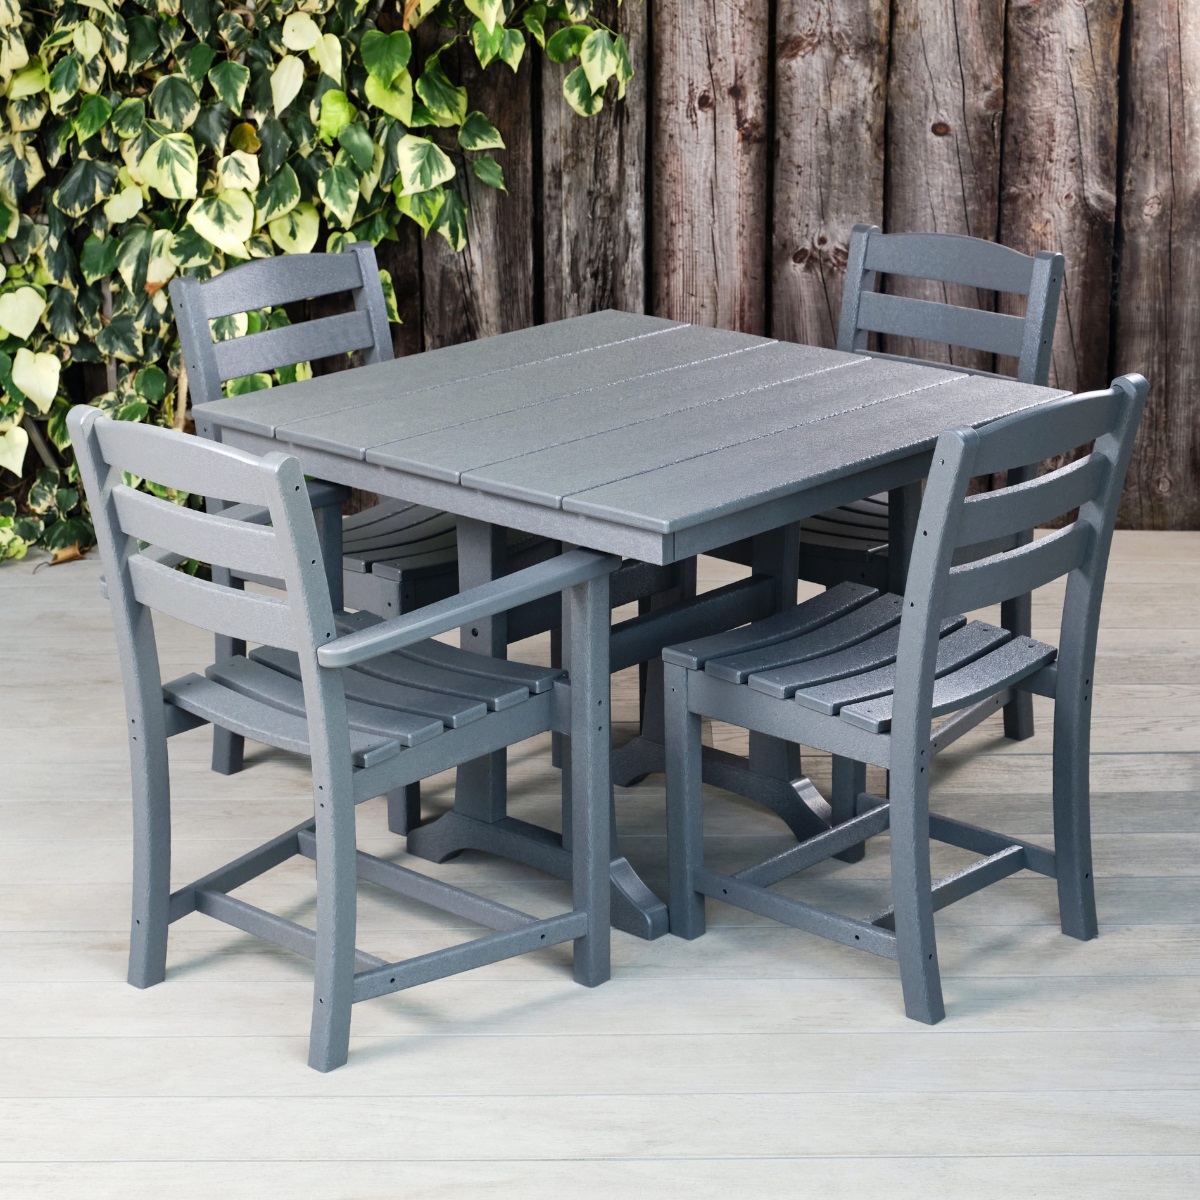 Recycled Plastic Outdoor Dining Table and Chairs